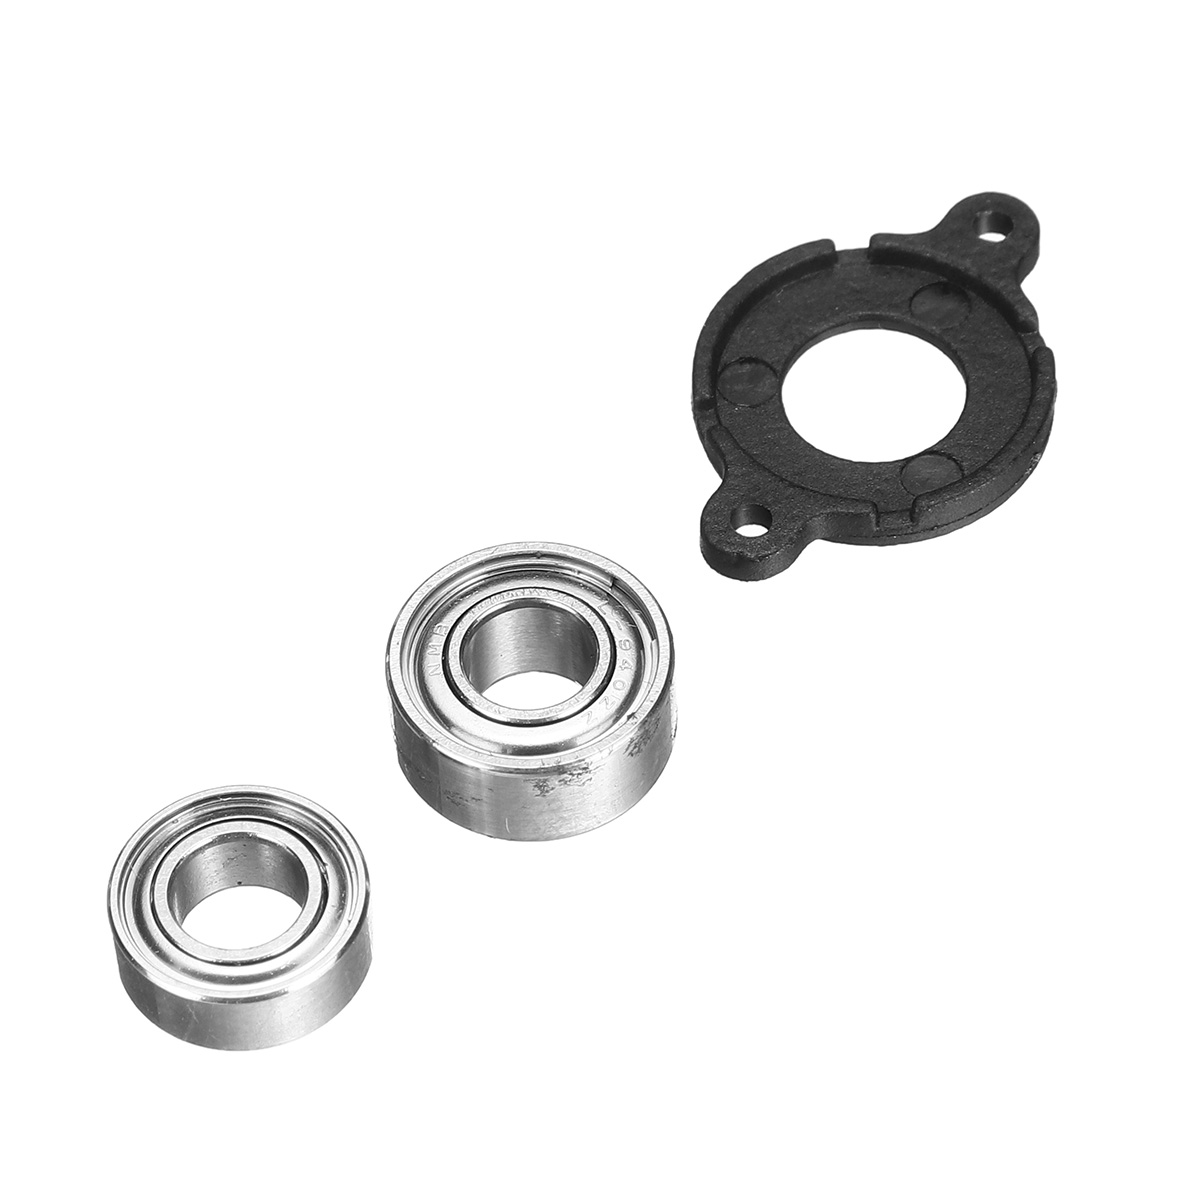 YXZNRC F09-S Eachine E200 Ball Bearing RC Helicopter Parts